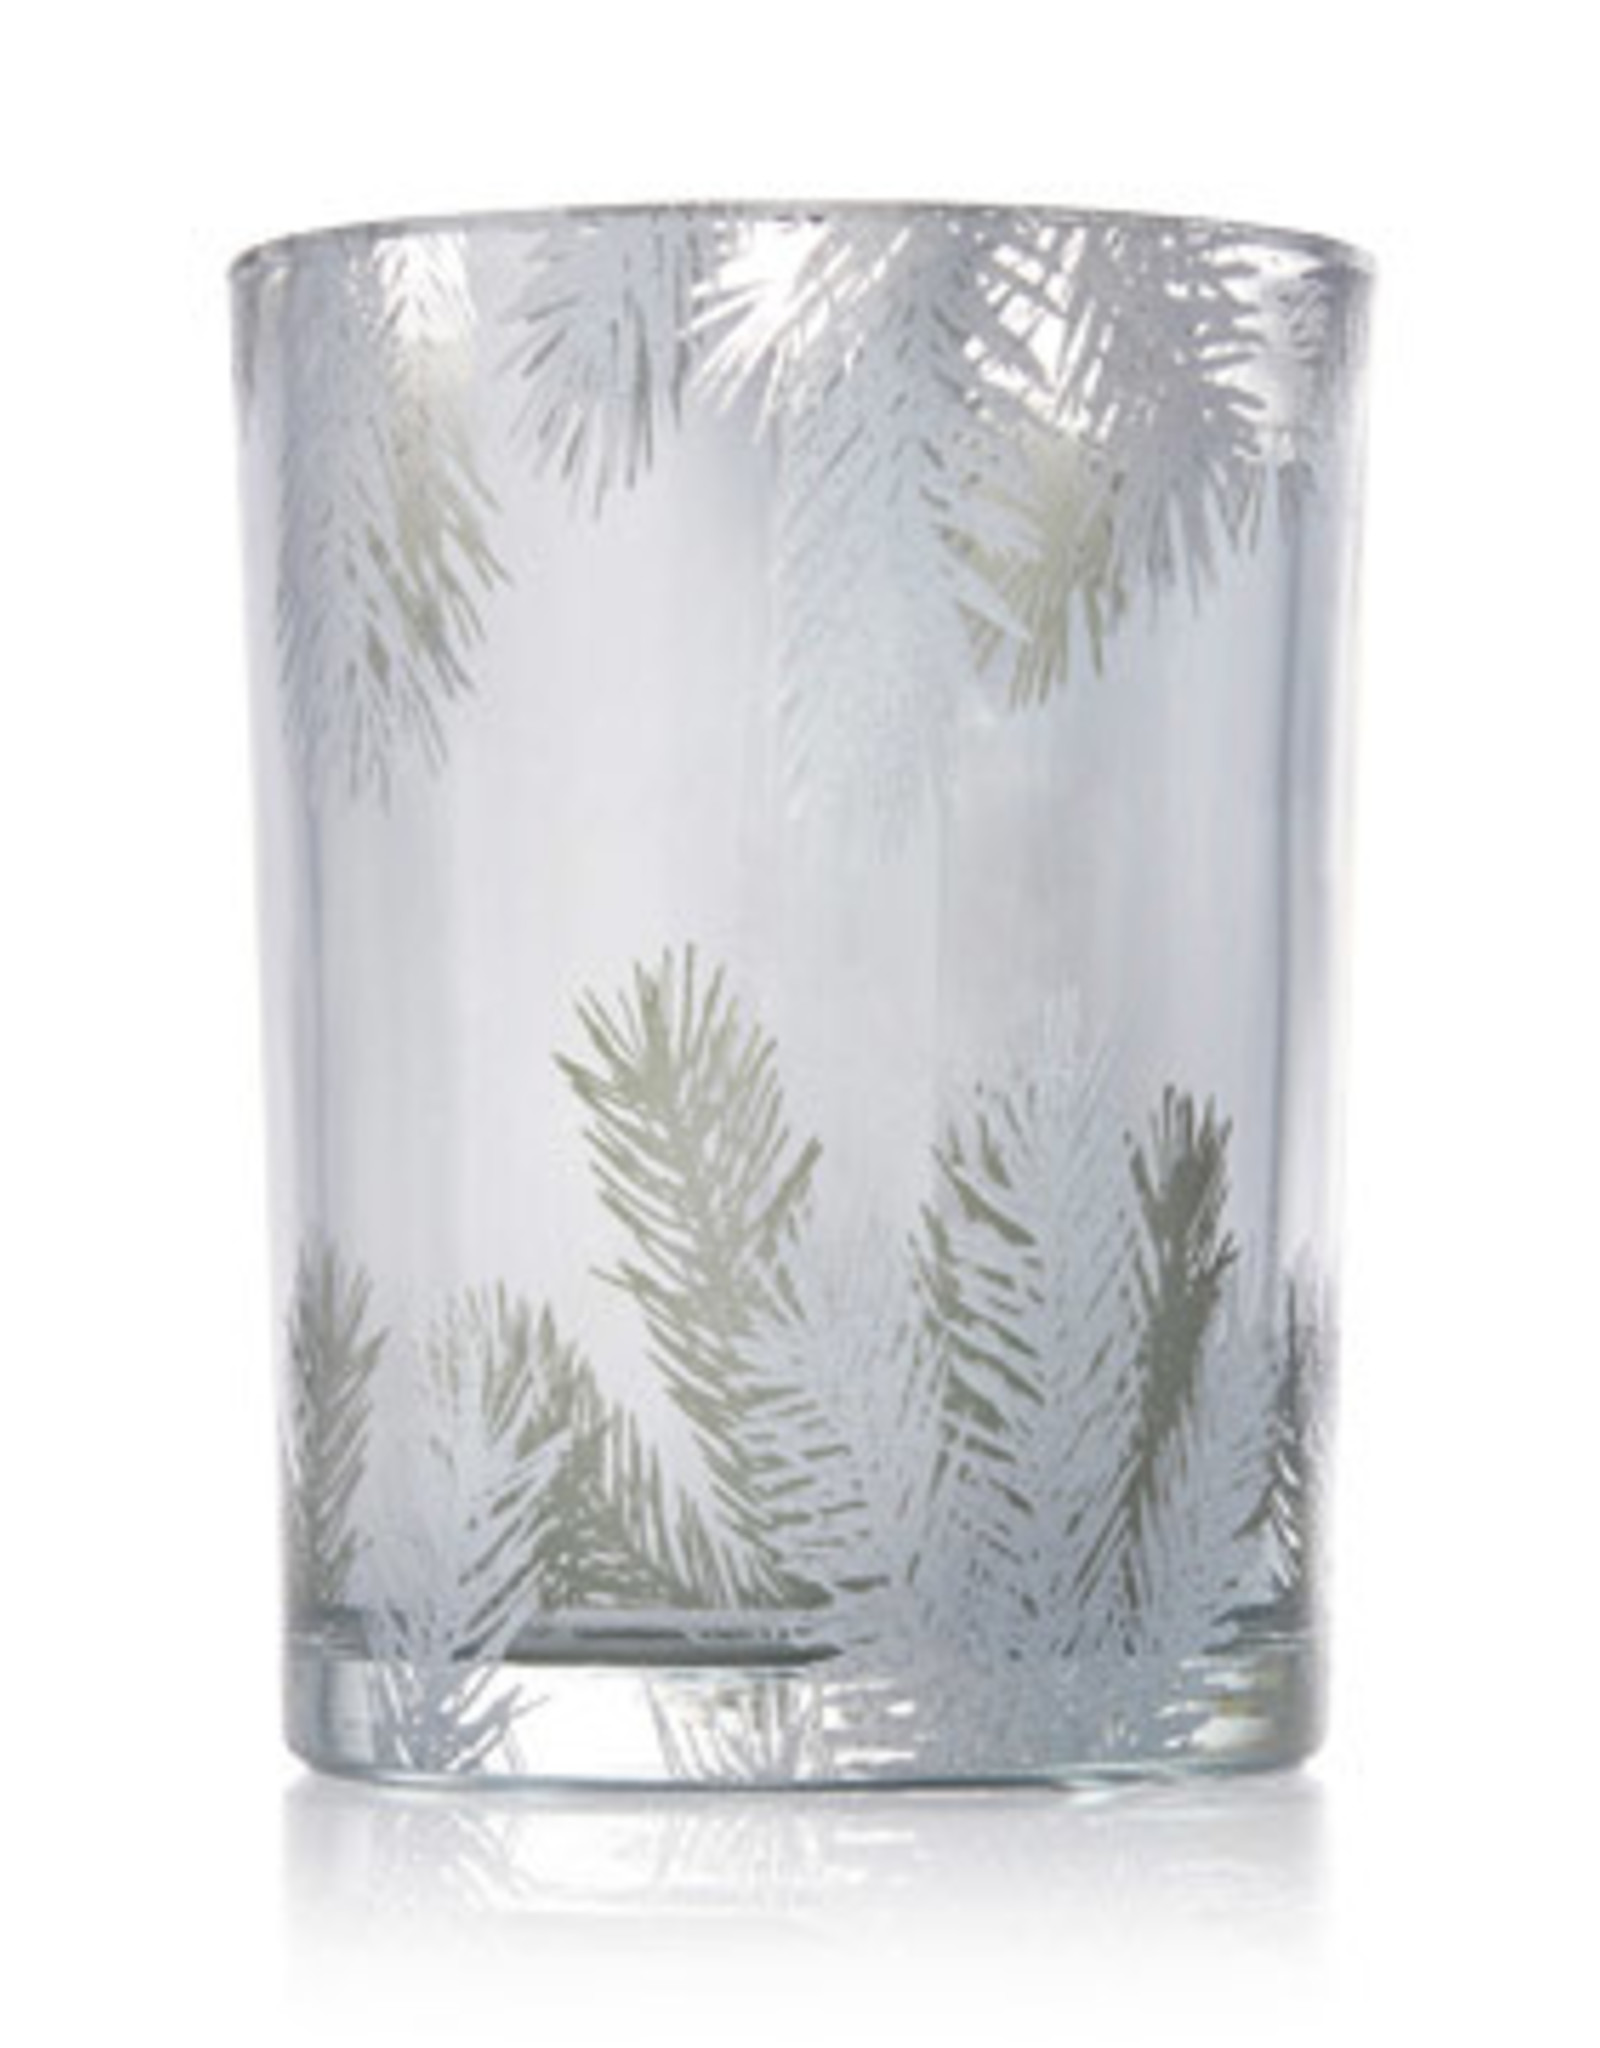 Frasier Fir Statement Small Luminary Poured Candle